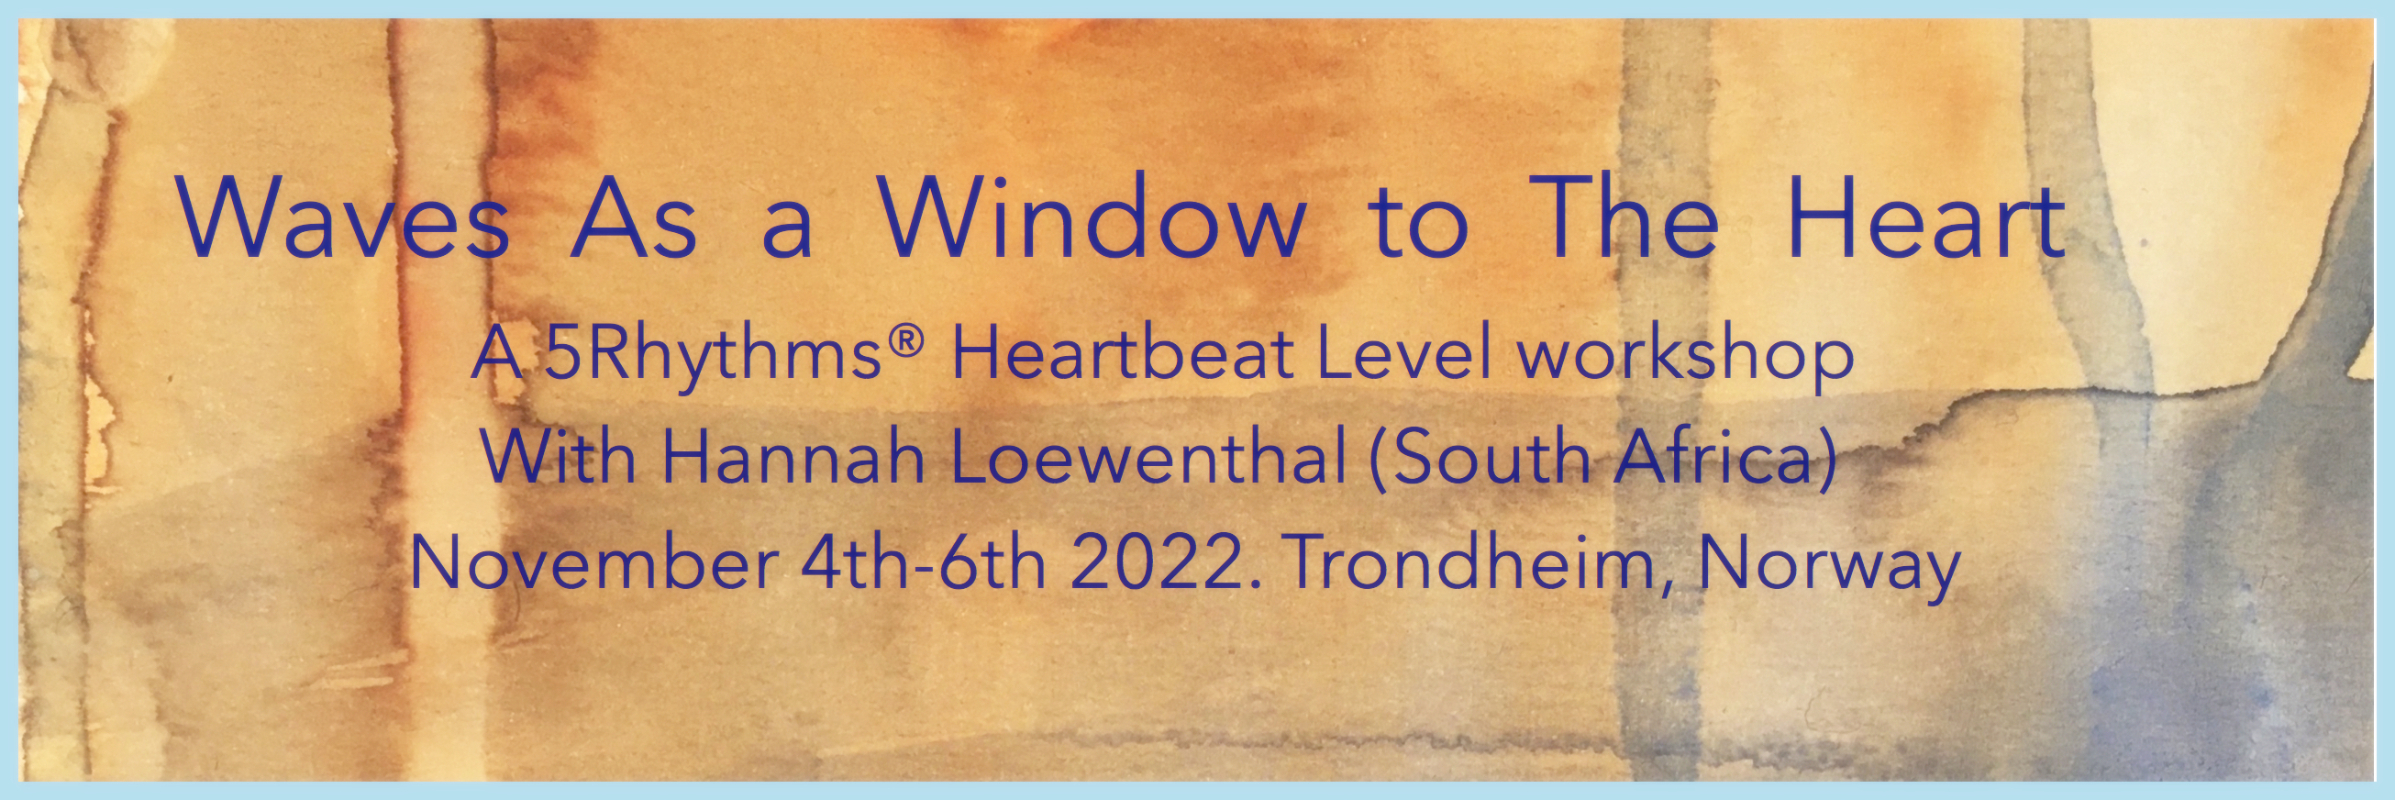 A 5Rhythms Heartbeat Level Workshop with Hannah Loewenthal ( South Africa )